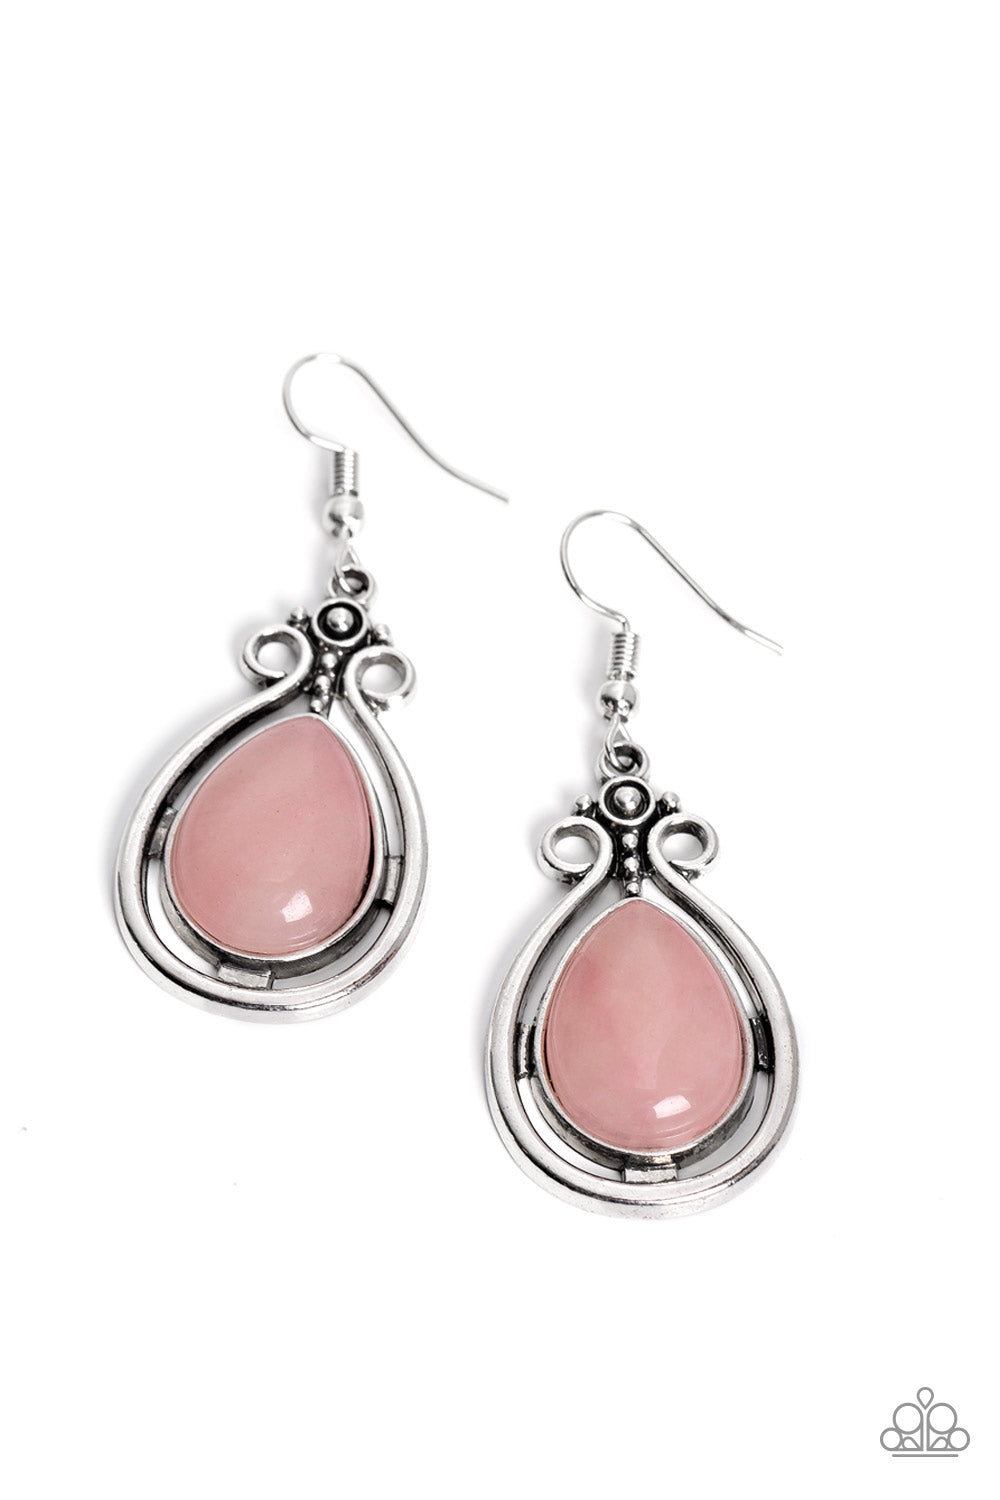 Mountain Mantra Pink Rose Quartz Stone Earrings - Paparazzi Accessories- lightbox - CarasShop.com - $5 Jewelry by Cara Jewels